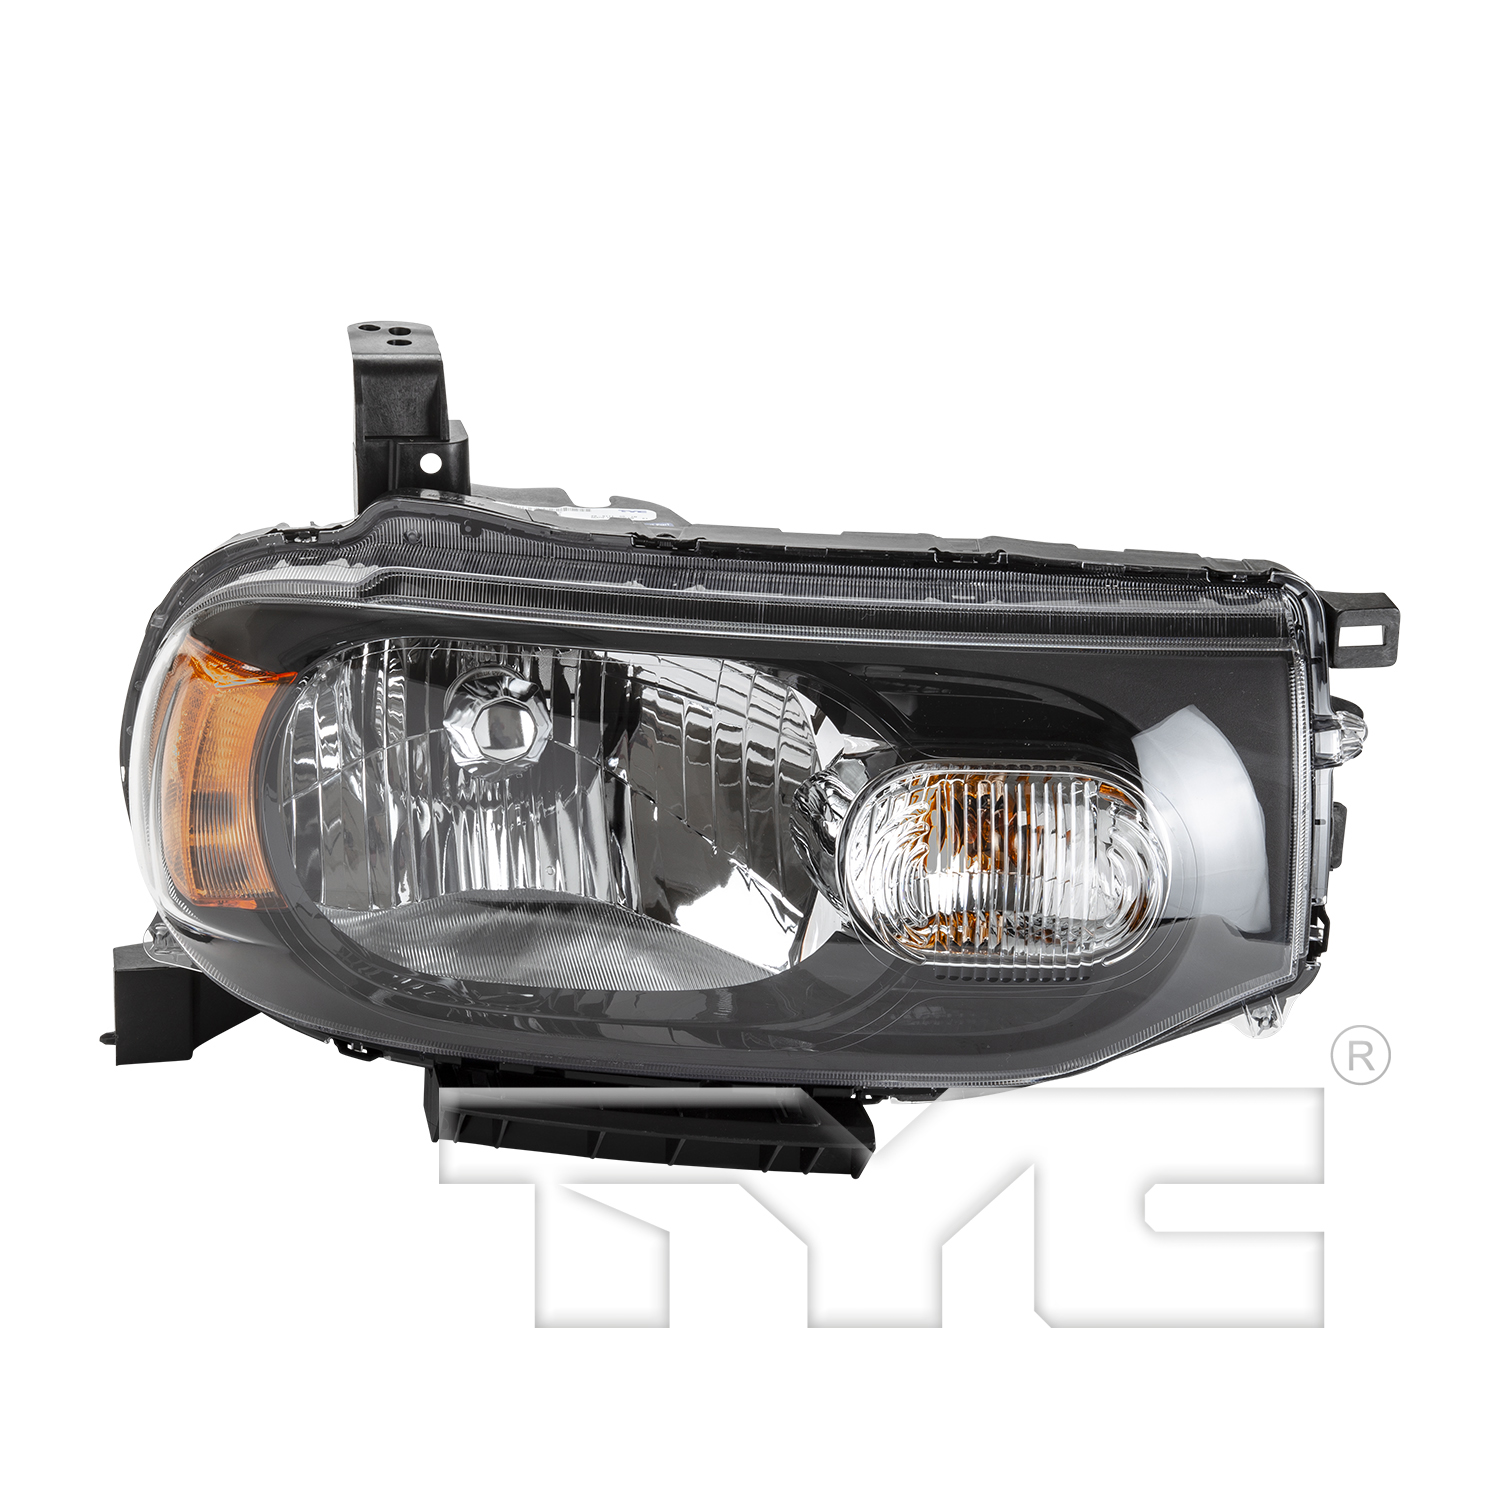 Aftermarket HEADLIGHTS for NISSAN - CUBE, CUBE,09-14,RT Headlamp assy composite